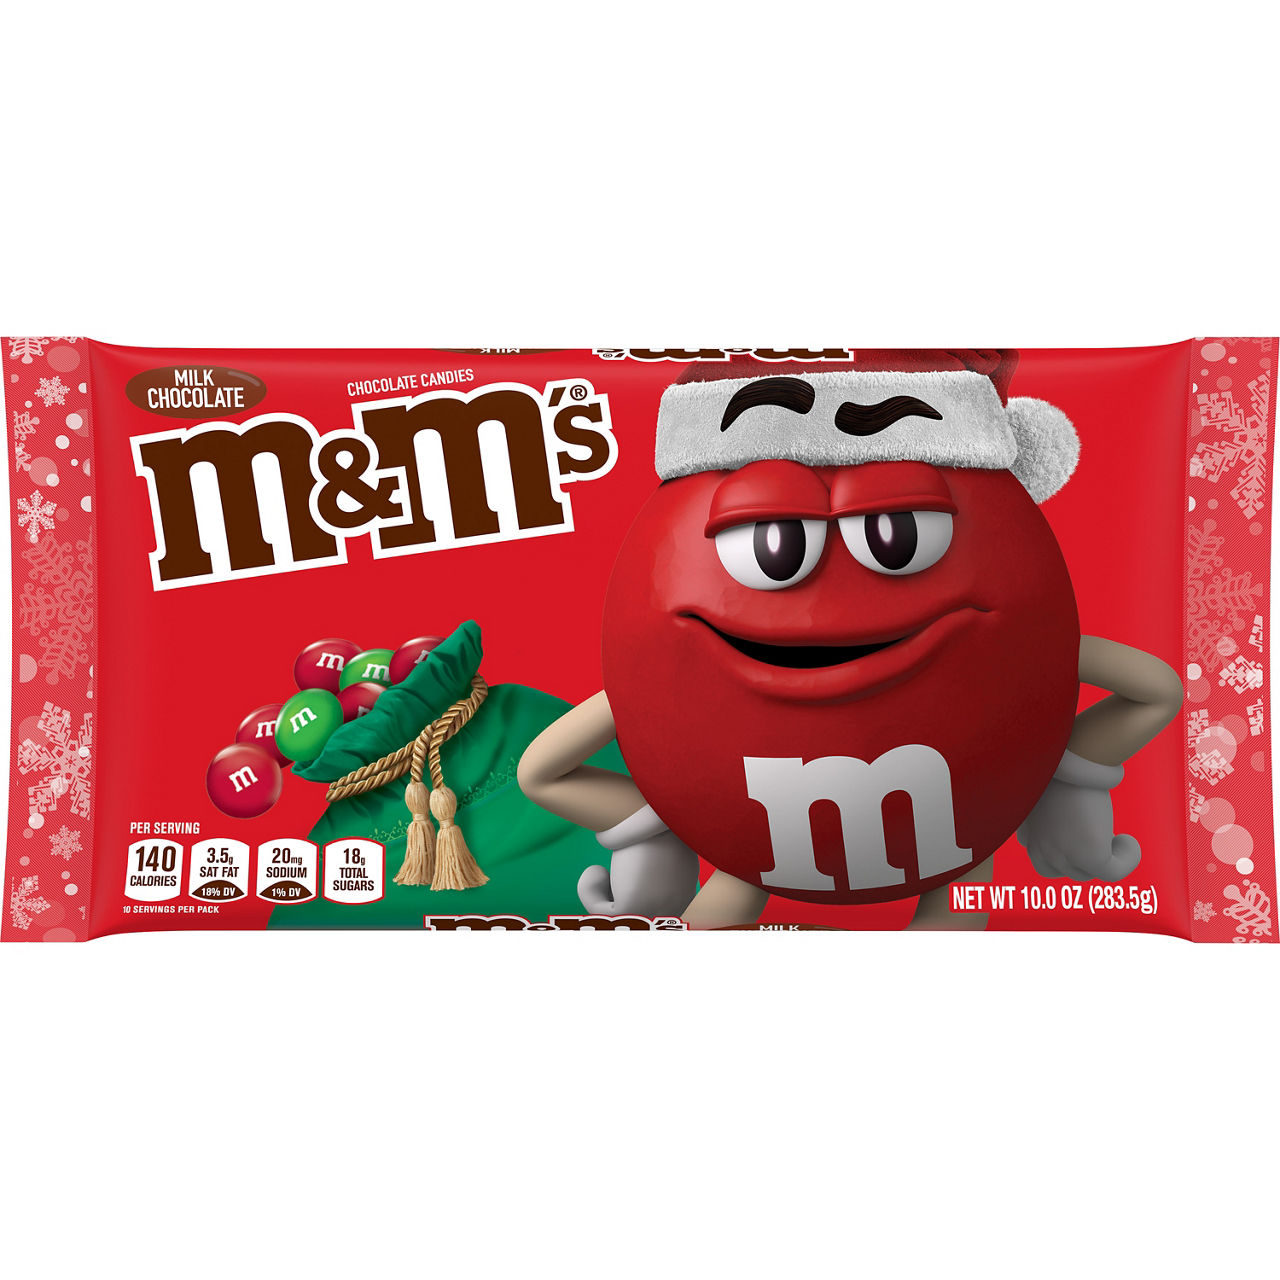 M&M's Mars Peanut Chocolate Bite Sharing Party Bag Pouch M&Ms  MMs - Pack of 1 Kg